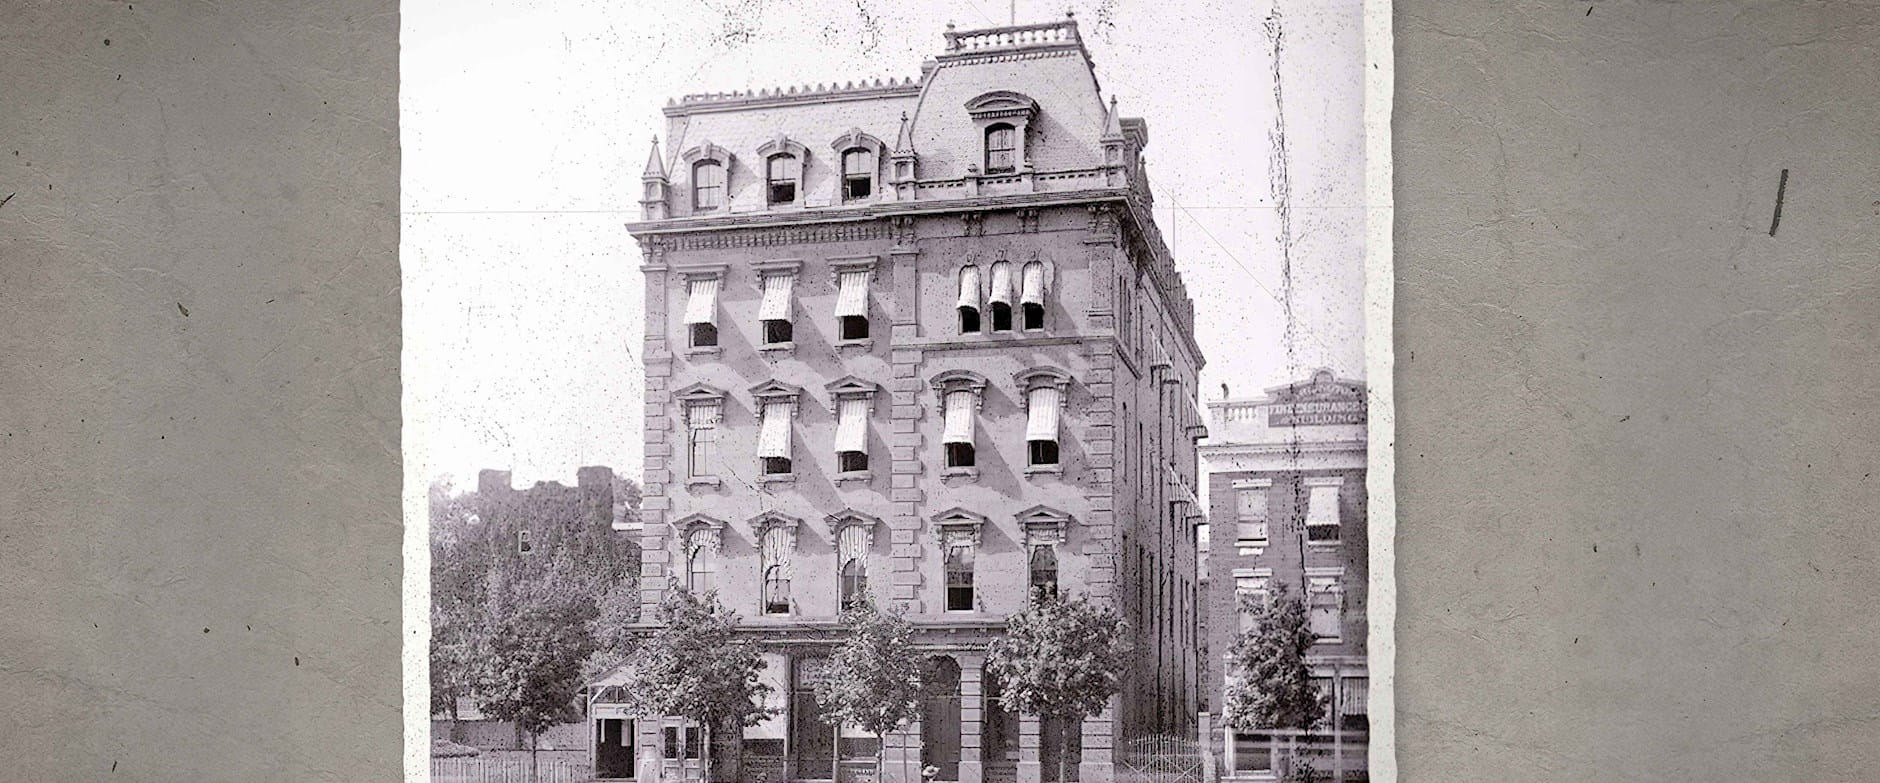 Black and white photo of a bank